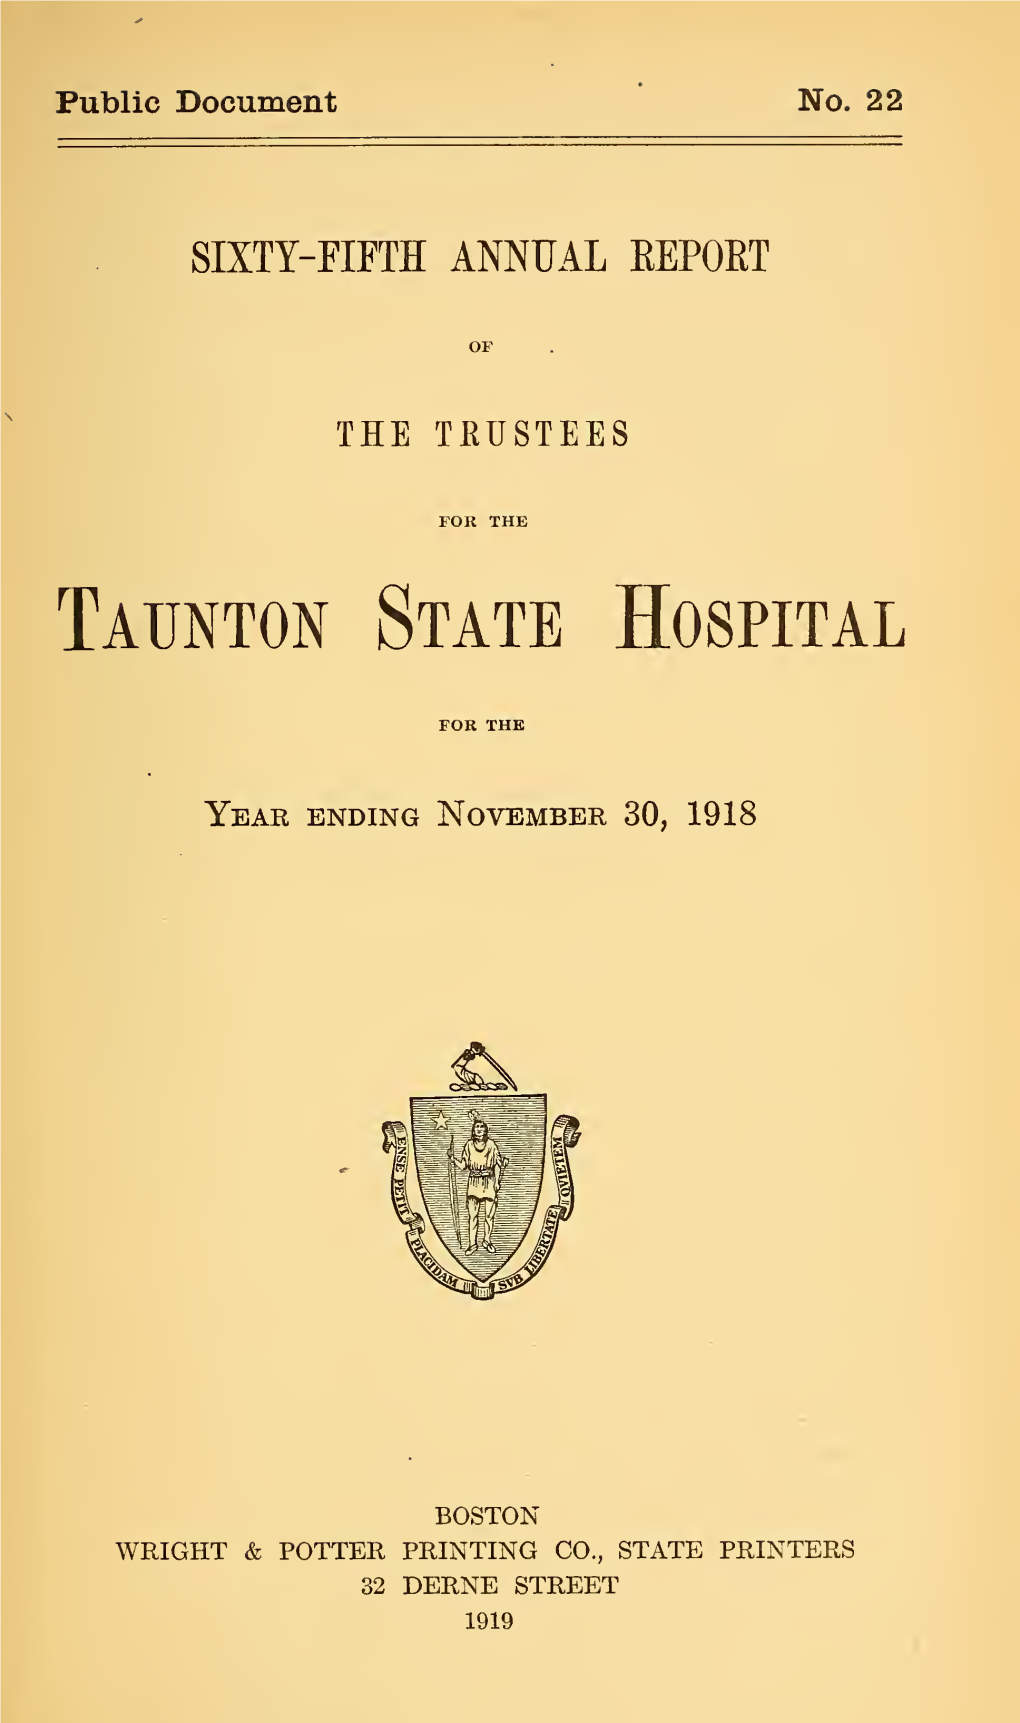 Annual Report of the Trustees of the Taunton State Hospital